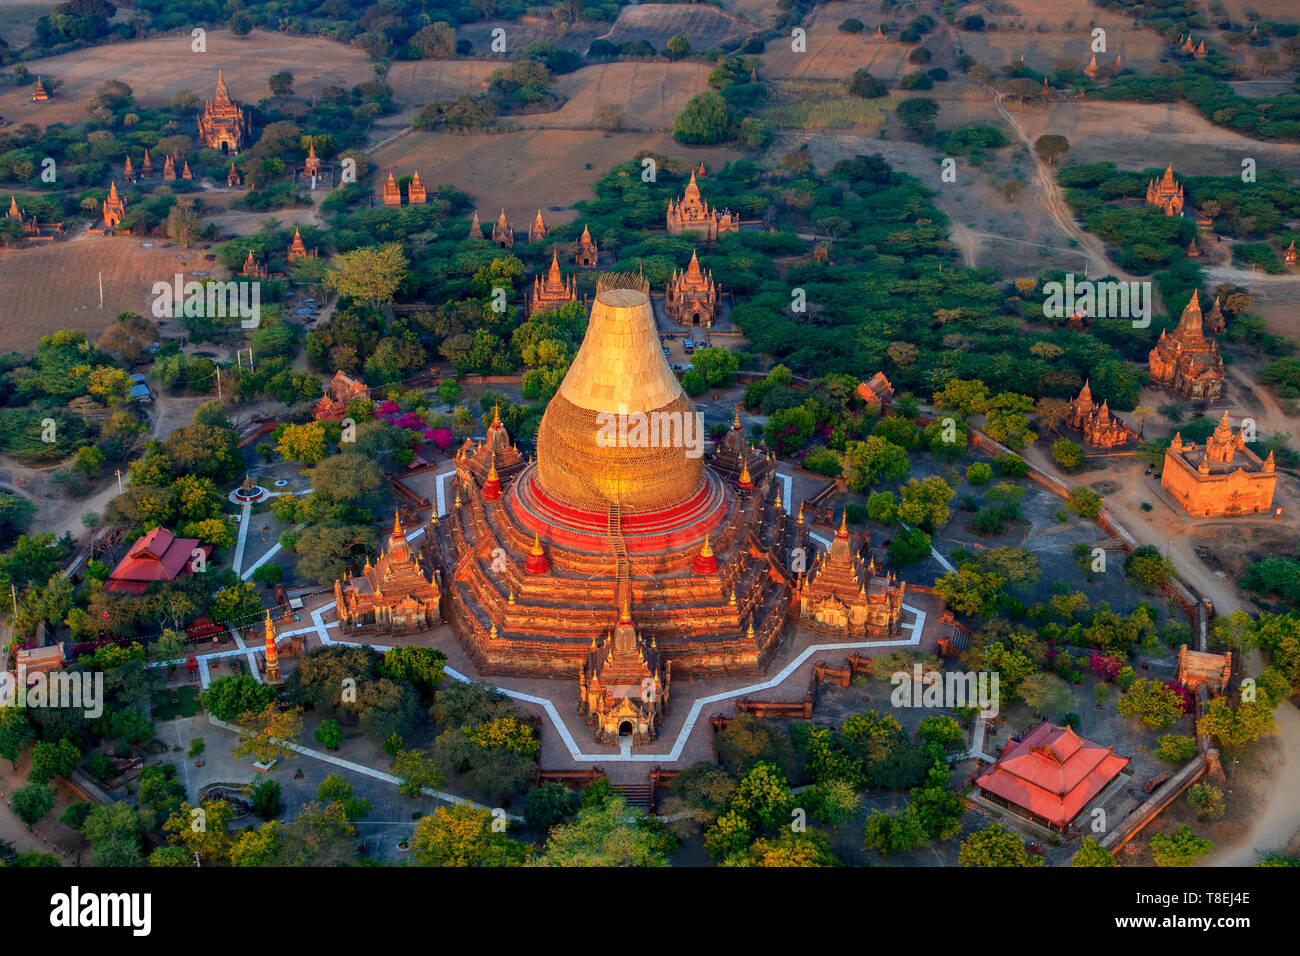 View of the Dhammayazika Pagoda from a hot air balloon flying over Bagan, Myanmar Stock Photo